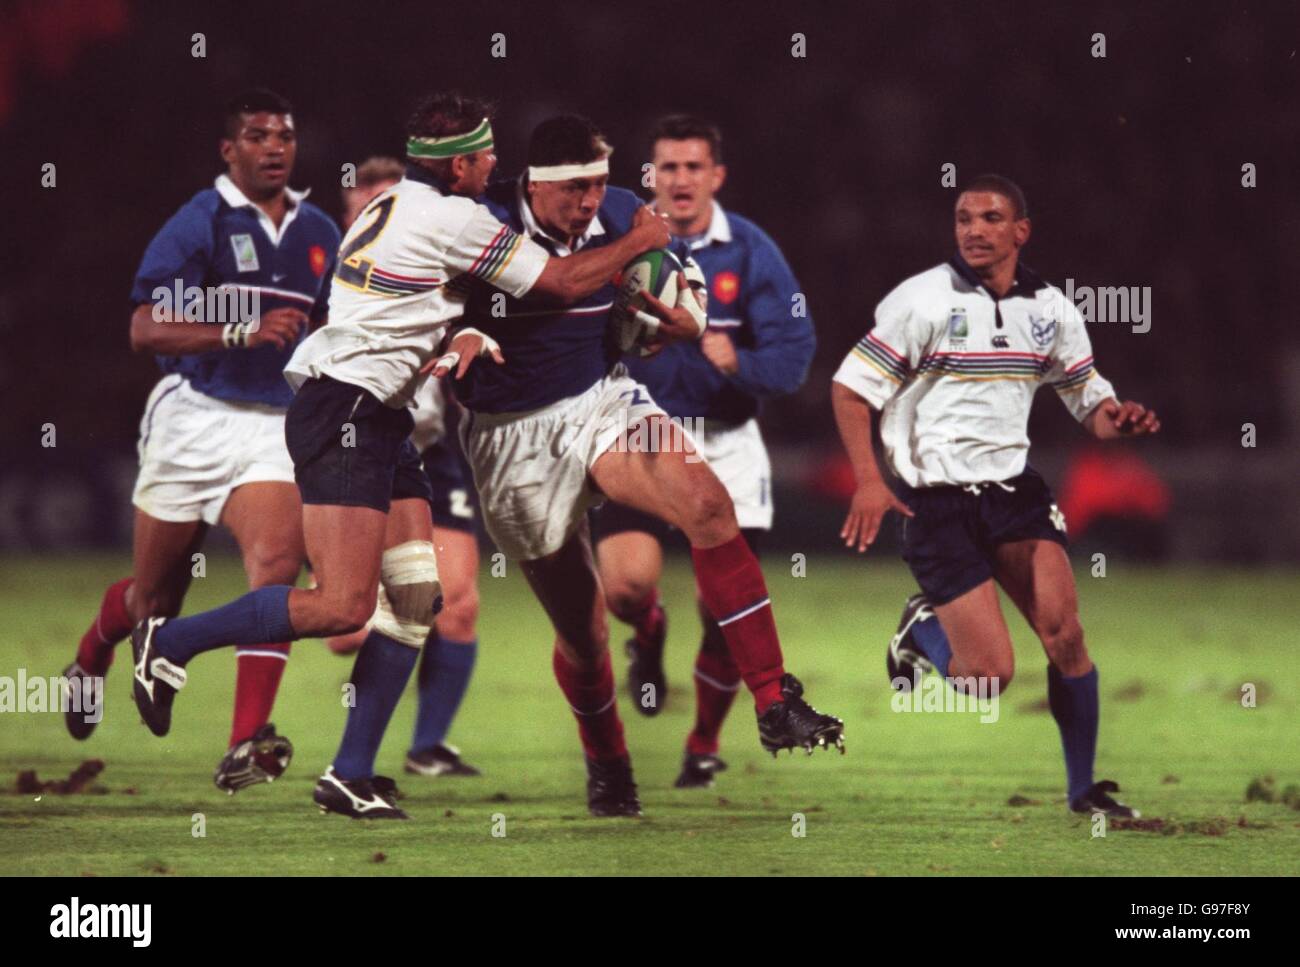 Rugby Union - Rugby World Cup 99 - Pool C - France v Namibia. L-R; Nambia's Schalk van der Merwe tackle's France's Abdelatif Benazzi Stock Photo